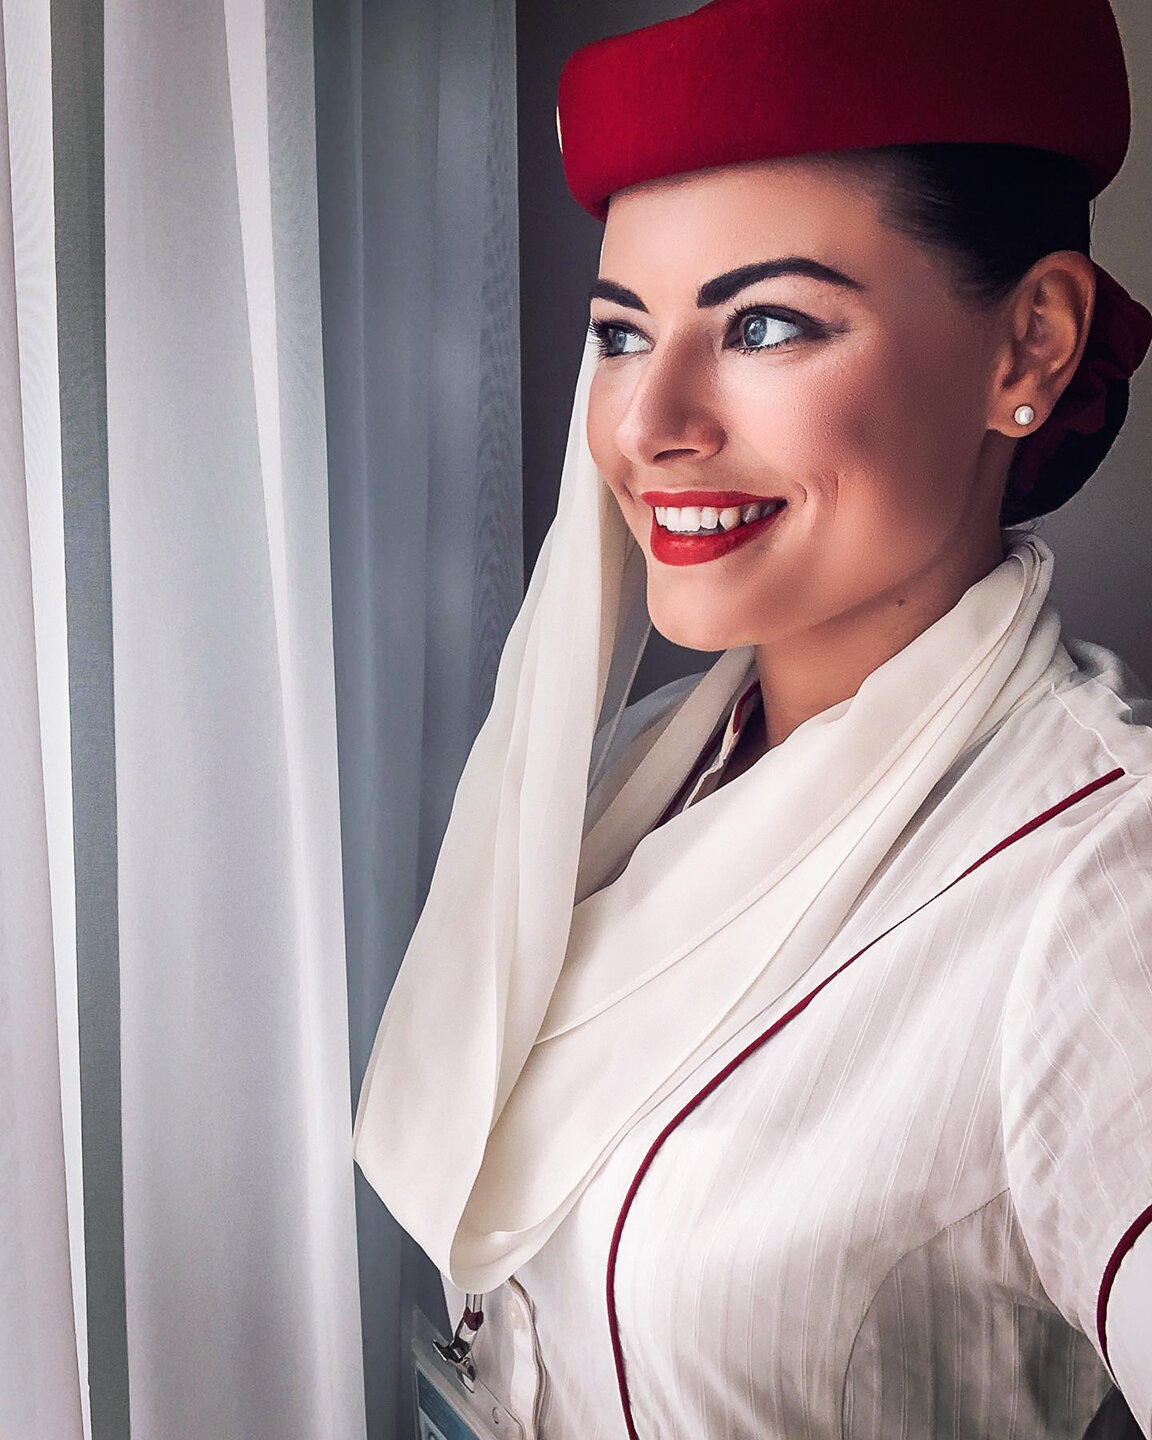 Emirates Cabin Crew Requirements - A to Z - Q&A - tattoos, acne, scars,  BMI, Vision, Dental, ... - YouTube